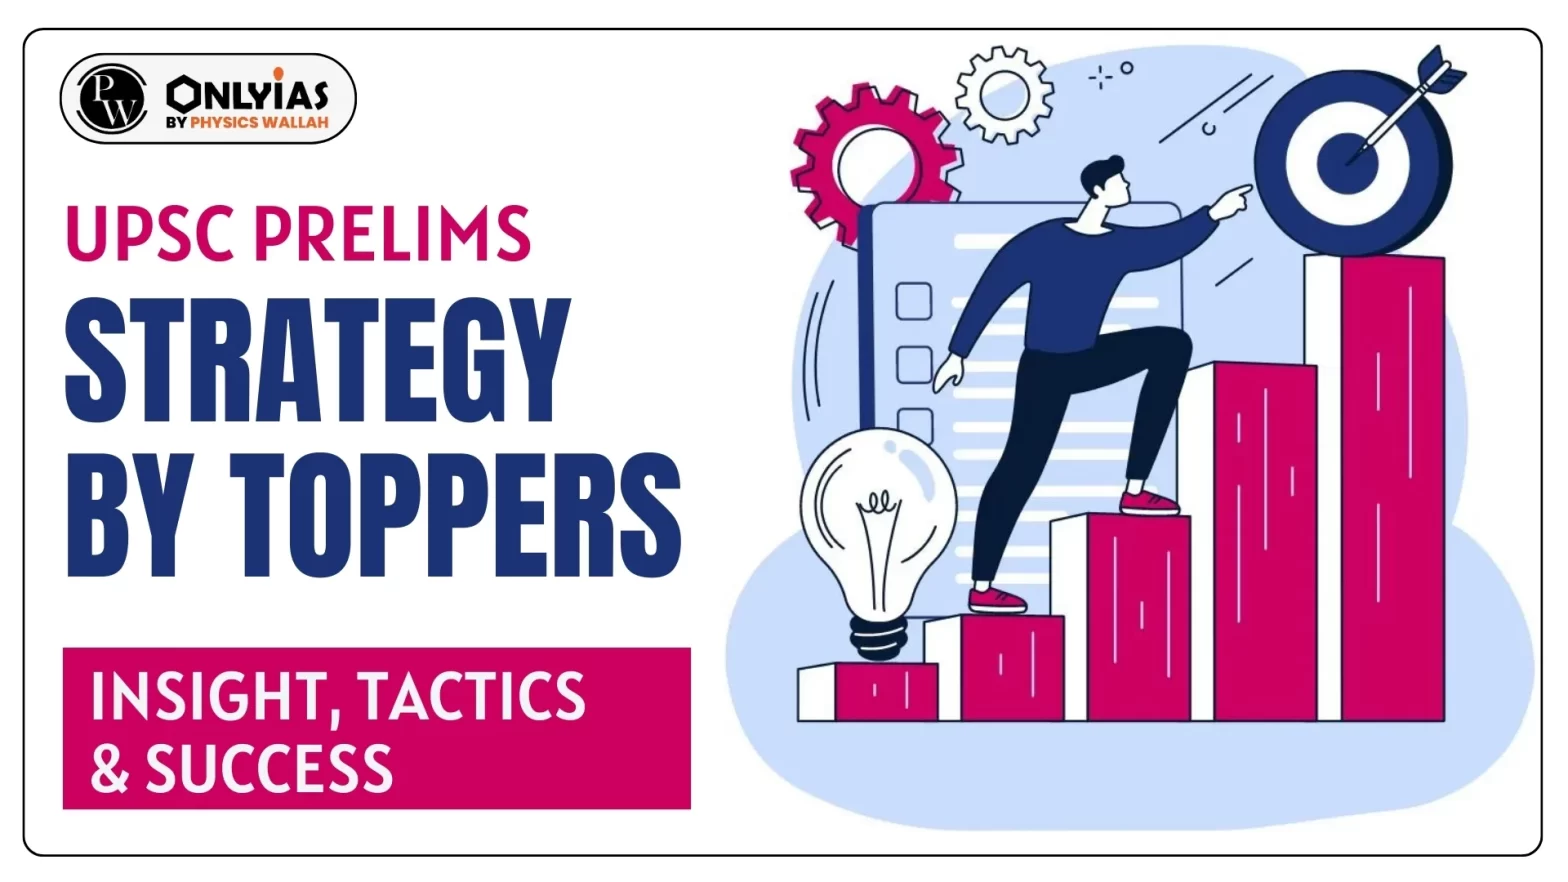 UPSC Prelims Strategy By Toppers: Insight, Tactics & Success